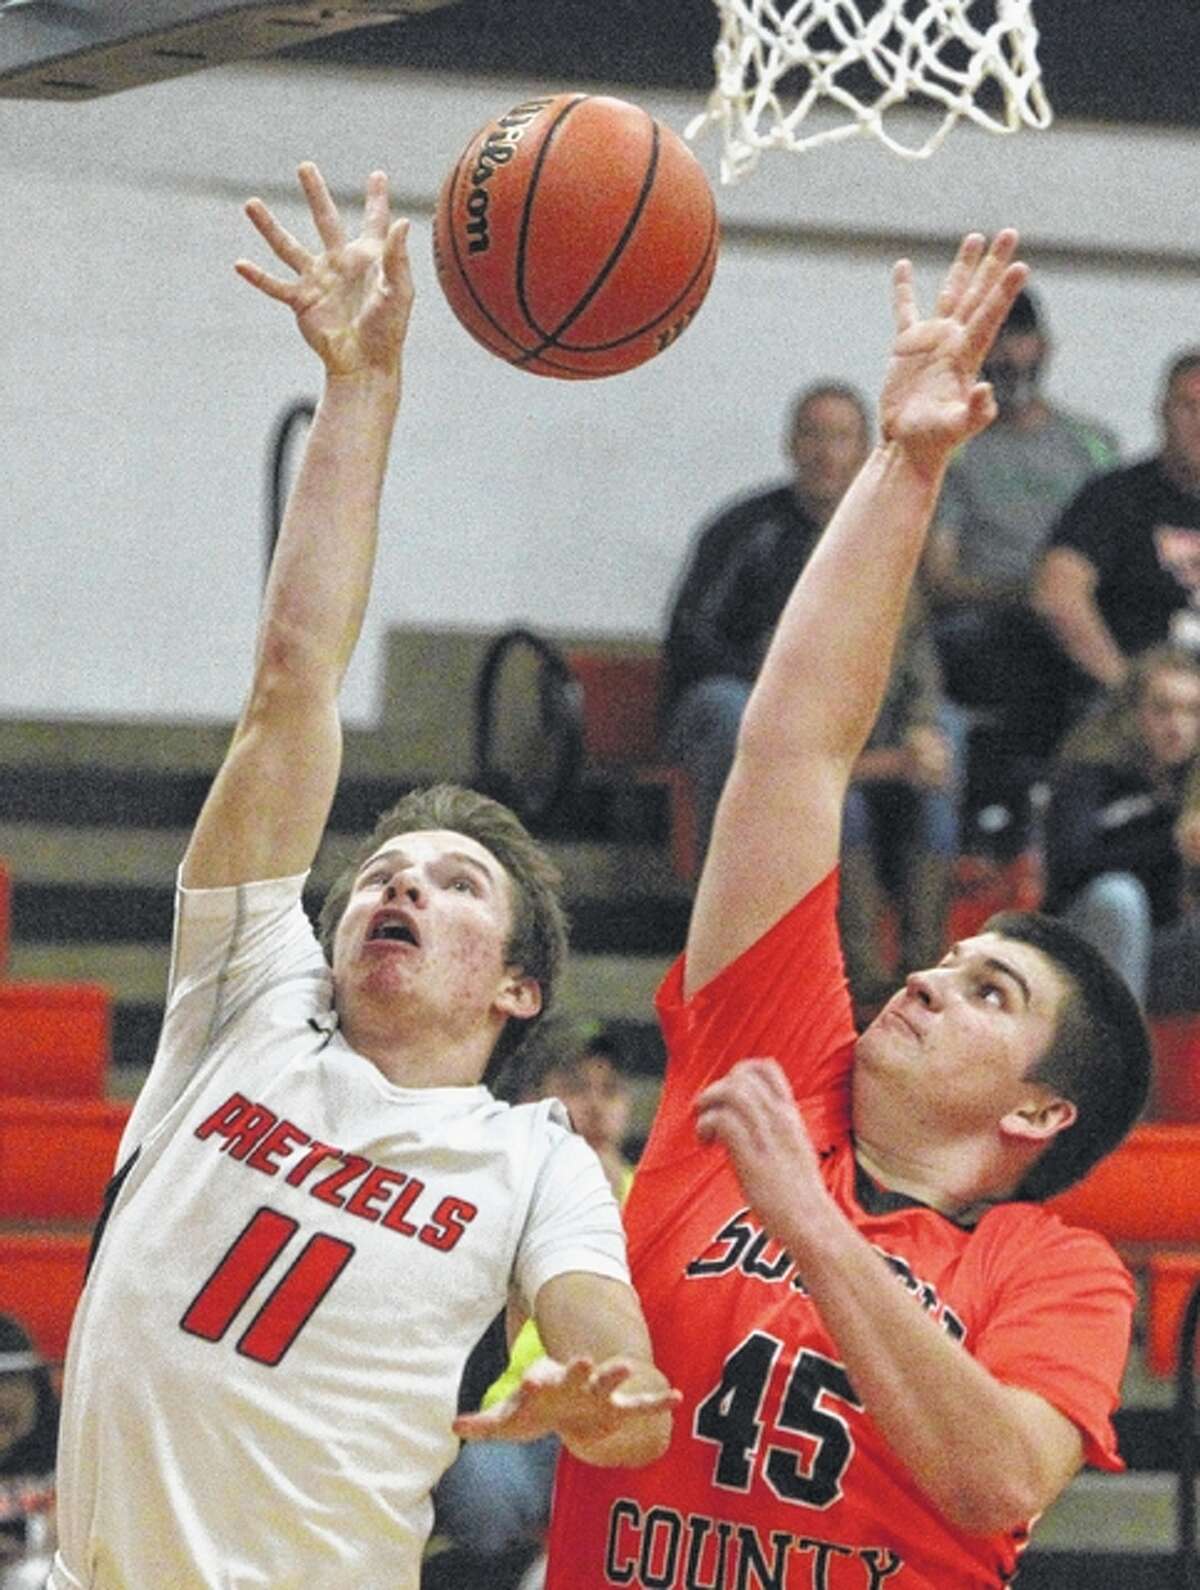 New Berlin’s Josh Fuchs puts up a shot as South County’s Lewis Wallbaum defends during a basketball game Friday at the Gene Bergschneider Turkey Tournament in New Berlin.